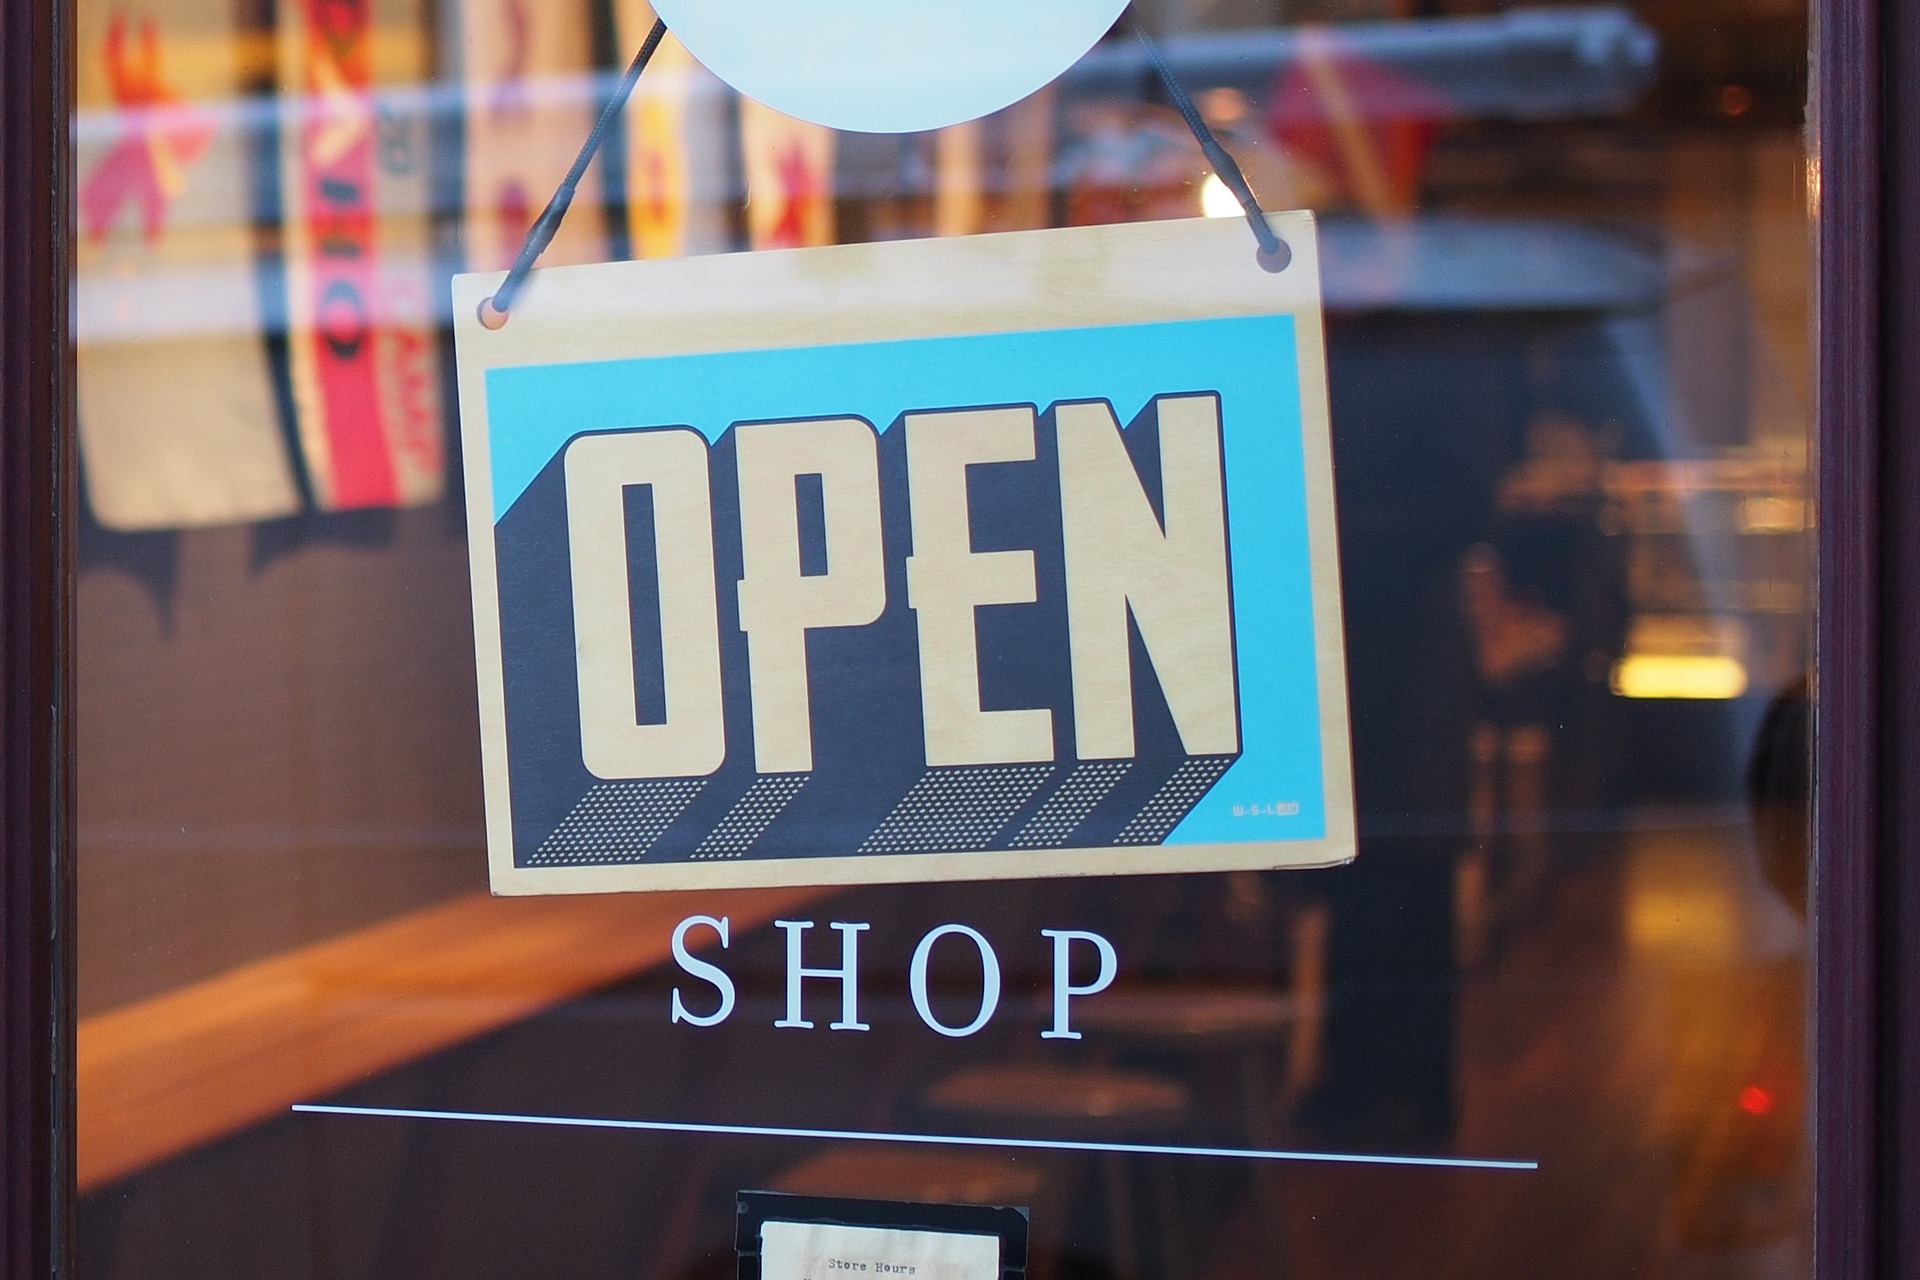 an image of a shop sign saying open